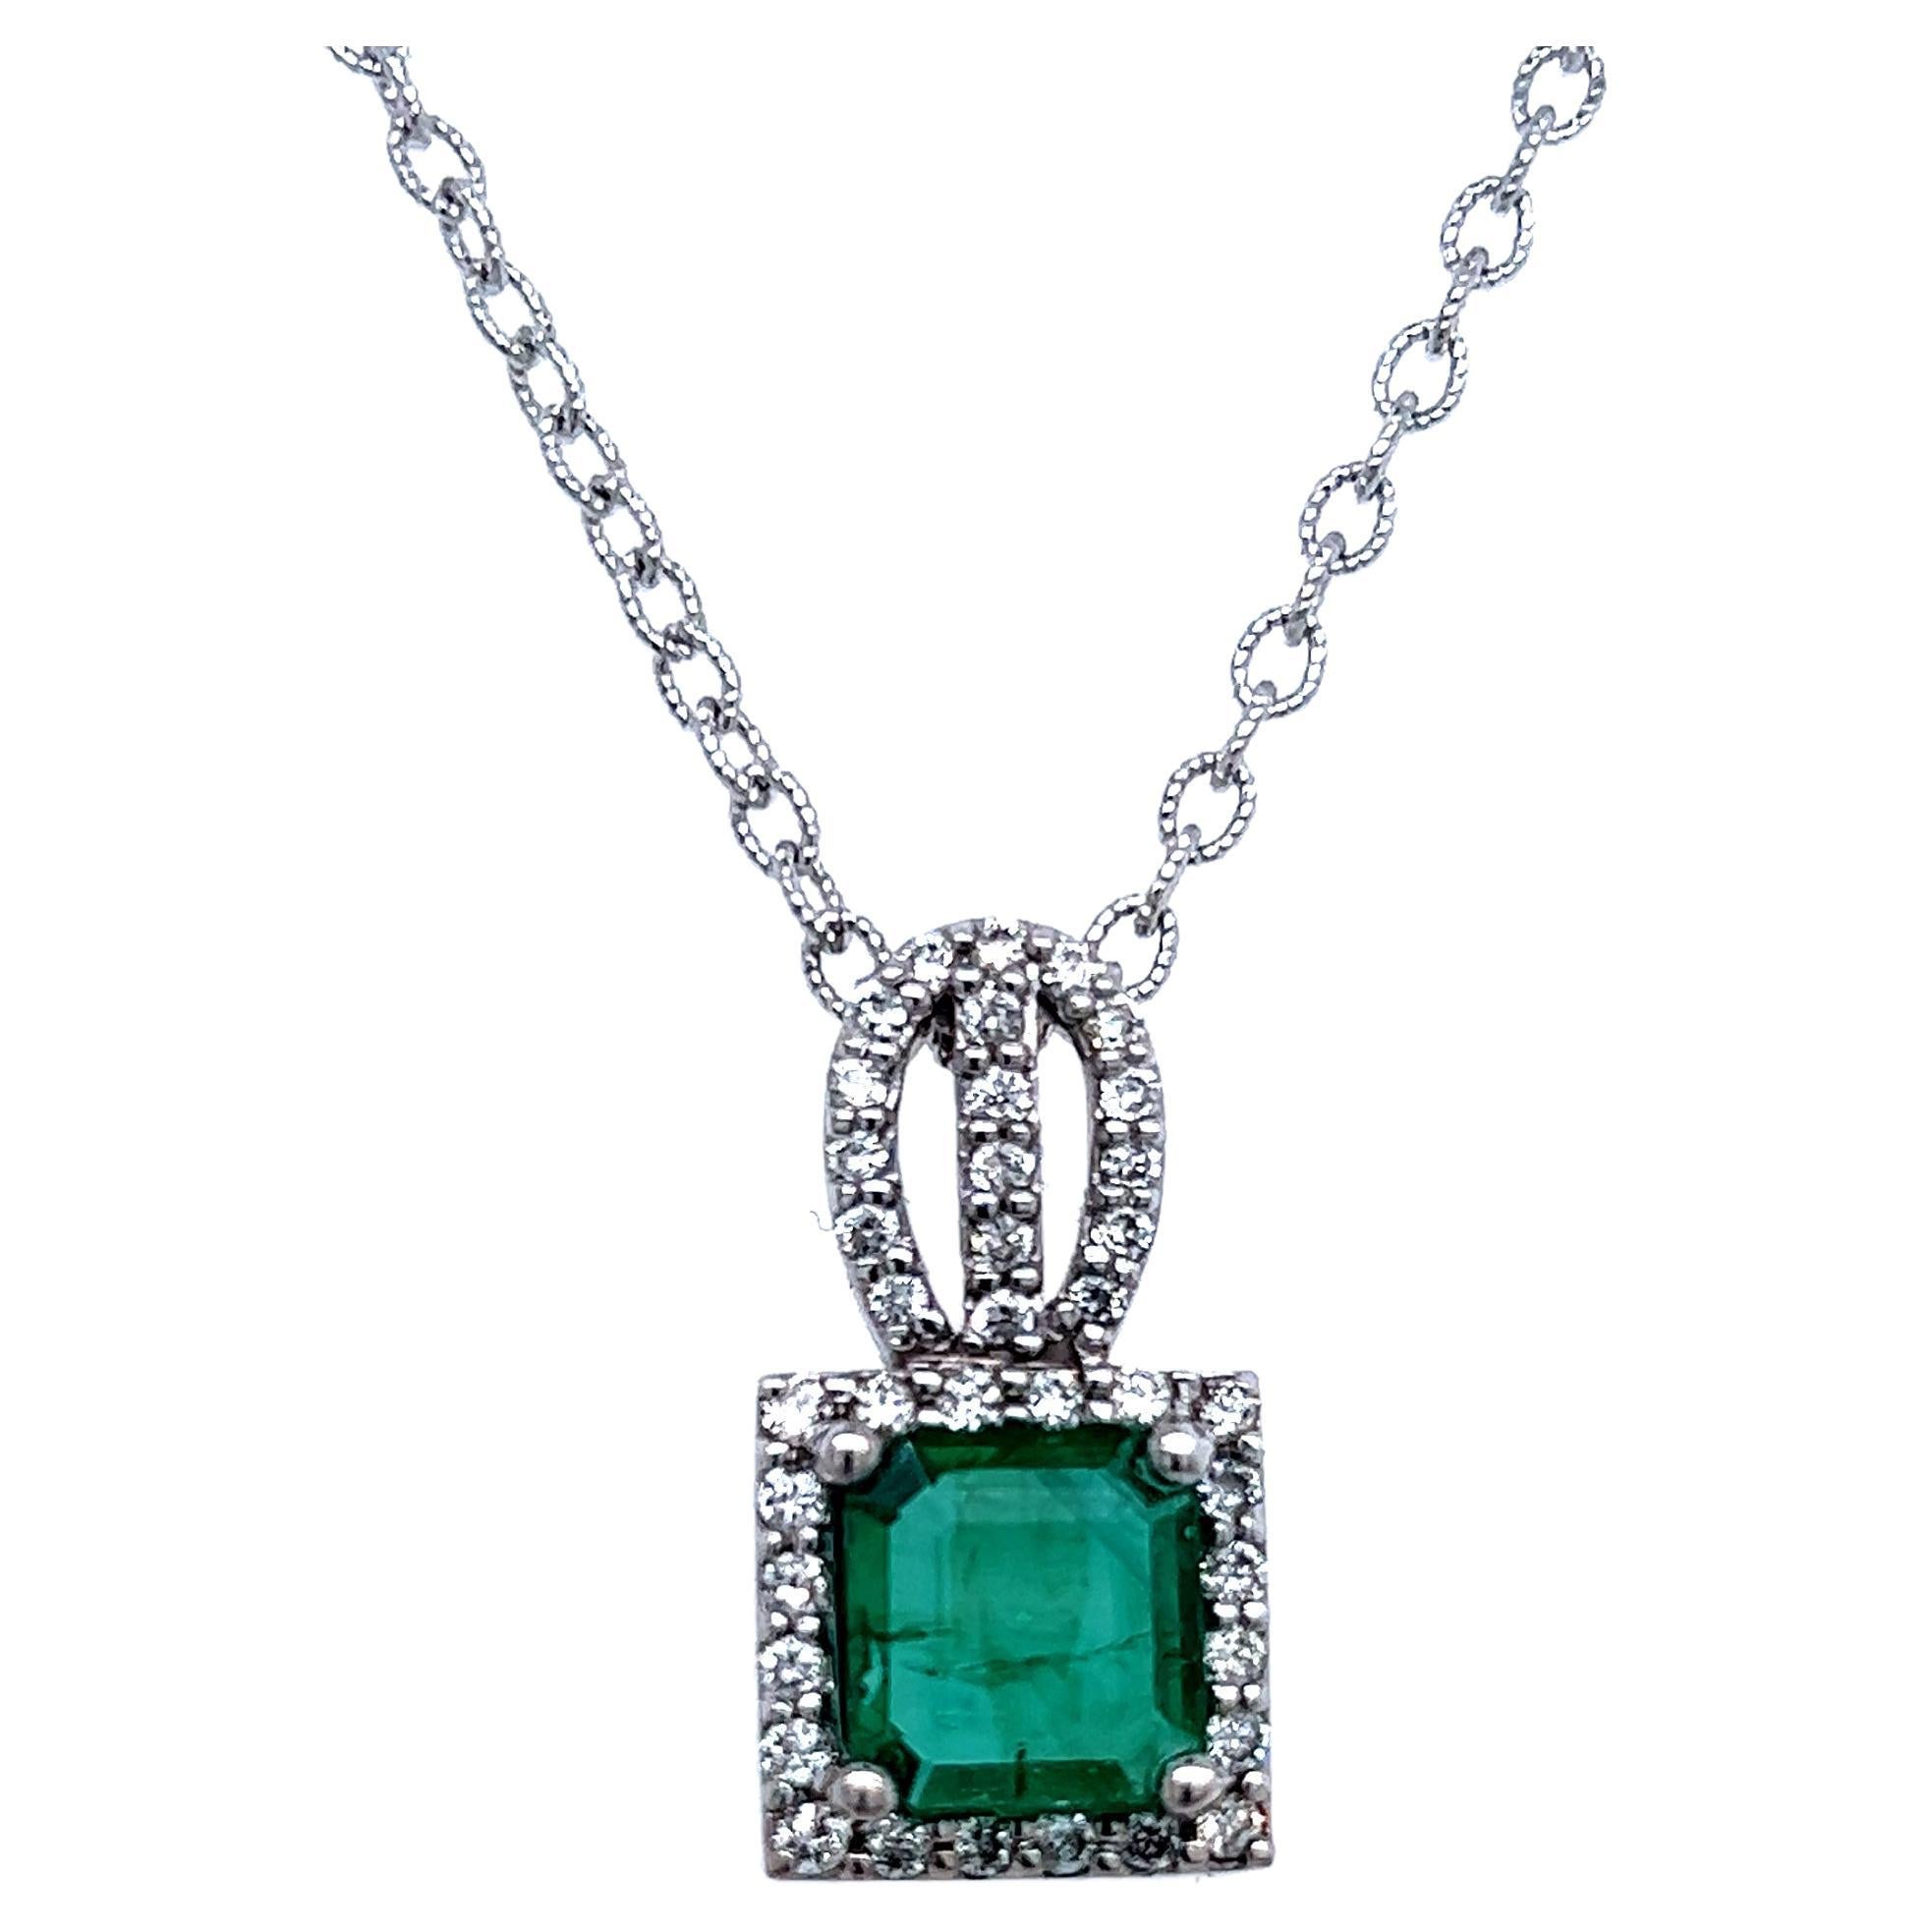 Natural Emerald Diamond Pendant Necklace 18" 14k White Gold 2.41 TCW Certified For Sale